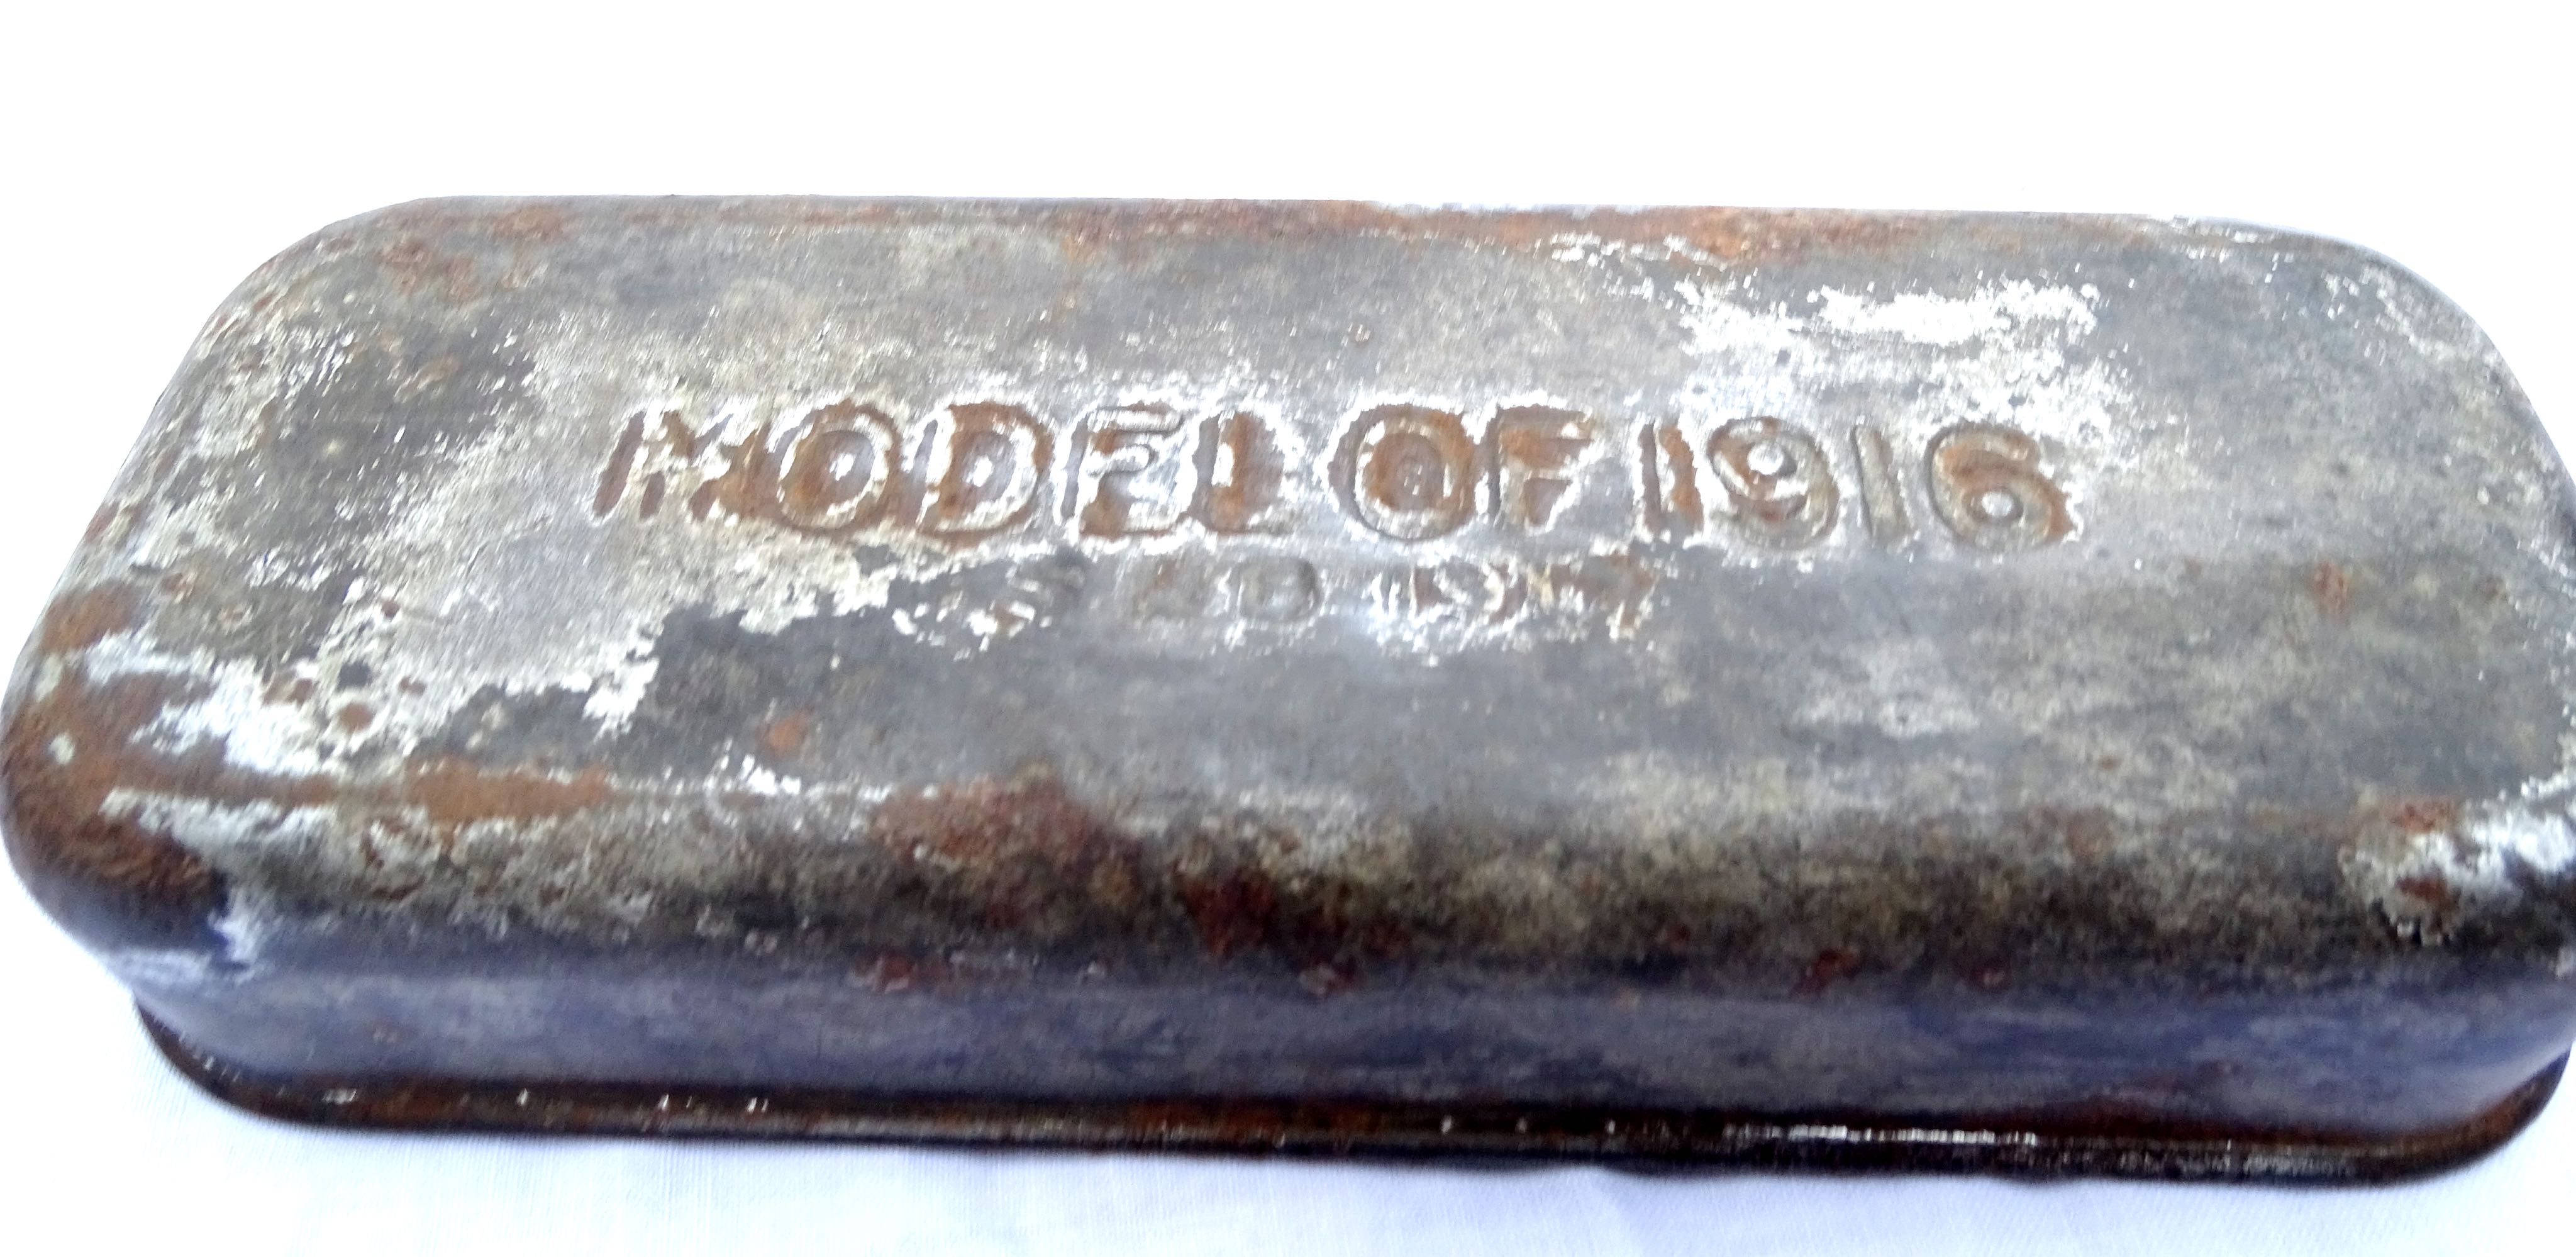 U.S. Model of 1916 Bacon can